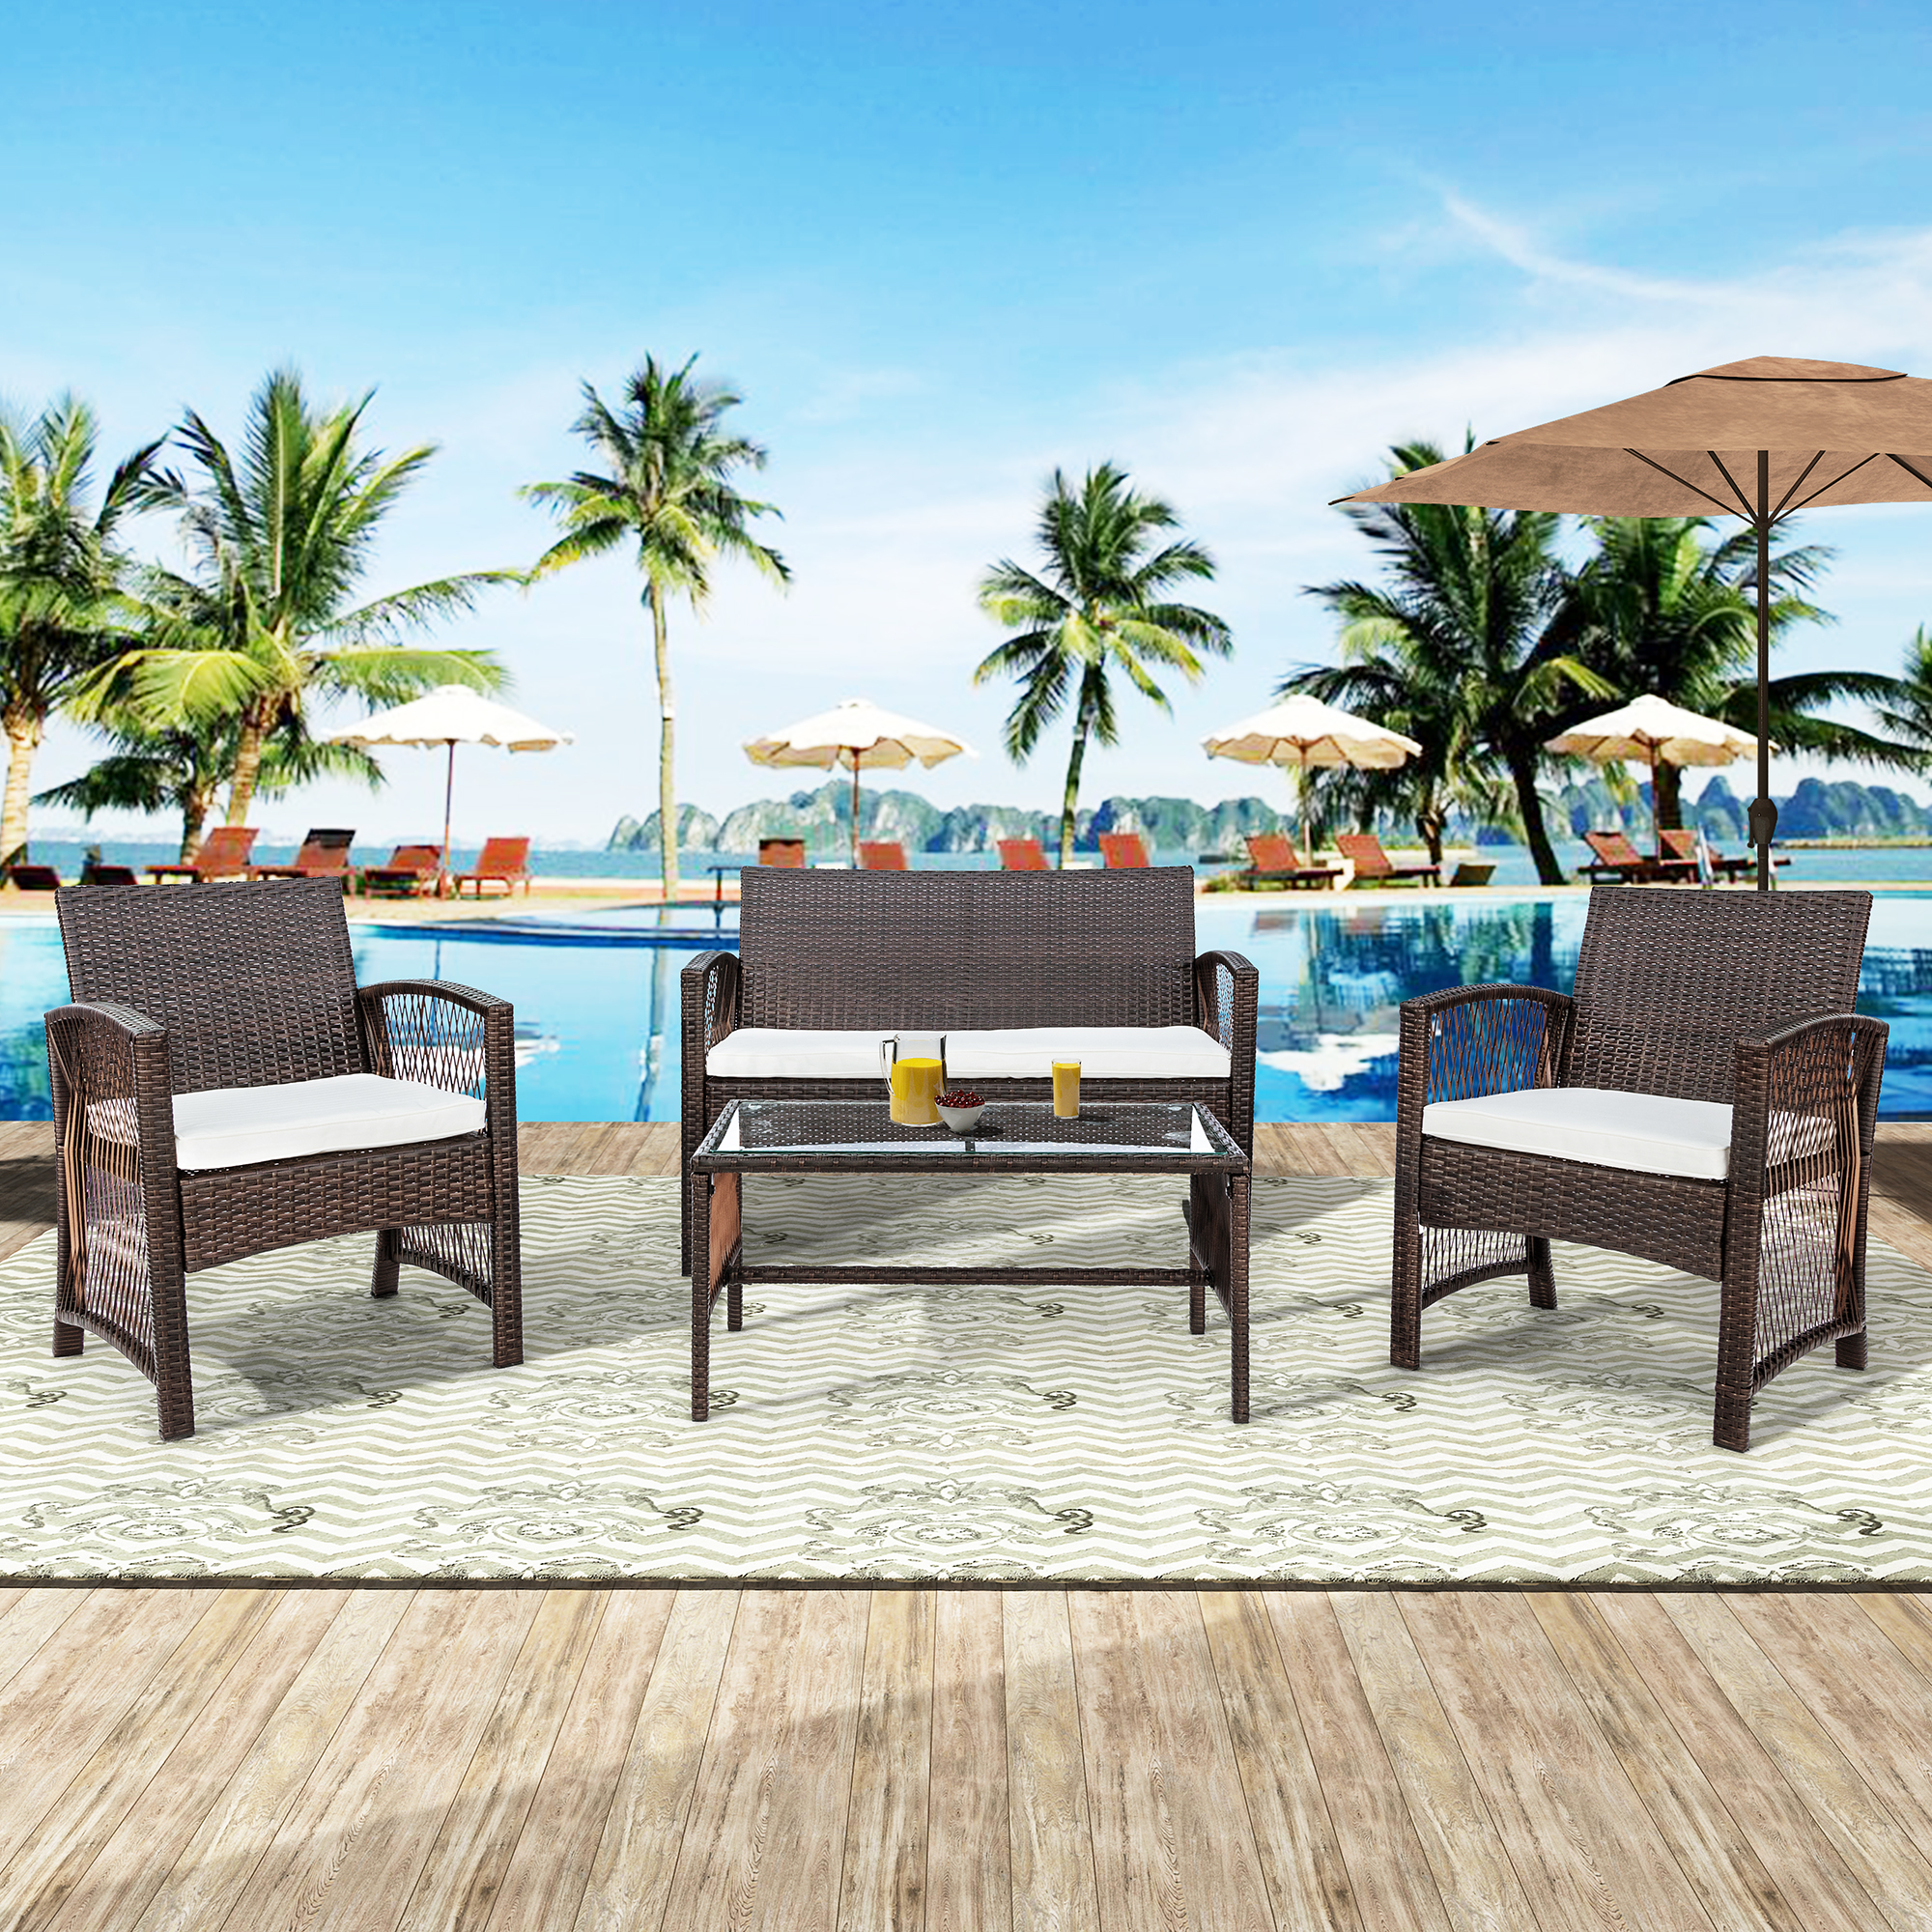 4 Pieces Outdoor Patio Furniture Sets, PE Rattan Chair Wicker Set with Two Single Sofa, One Loveseat, Tempered Glass Table, Backyard Porch Garden Poolside Balcony Furniture Sets, Q8591 - image 2 of 13